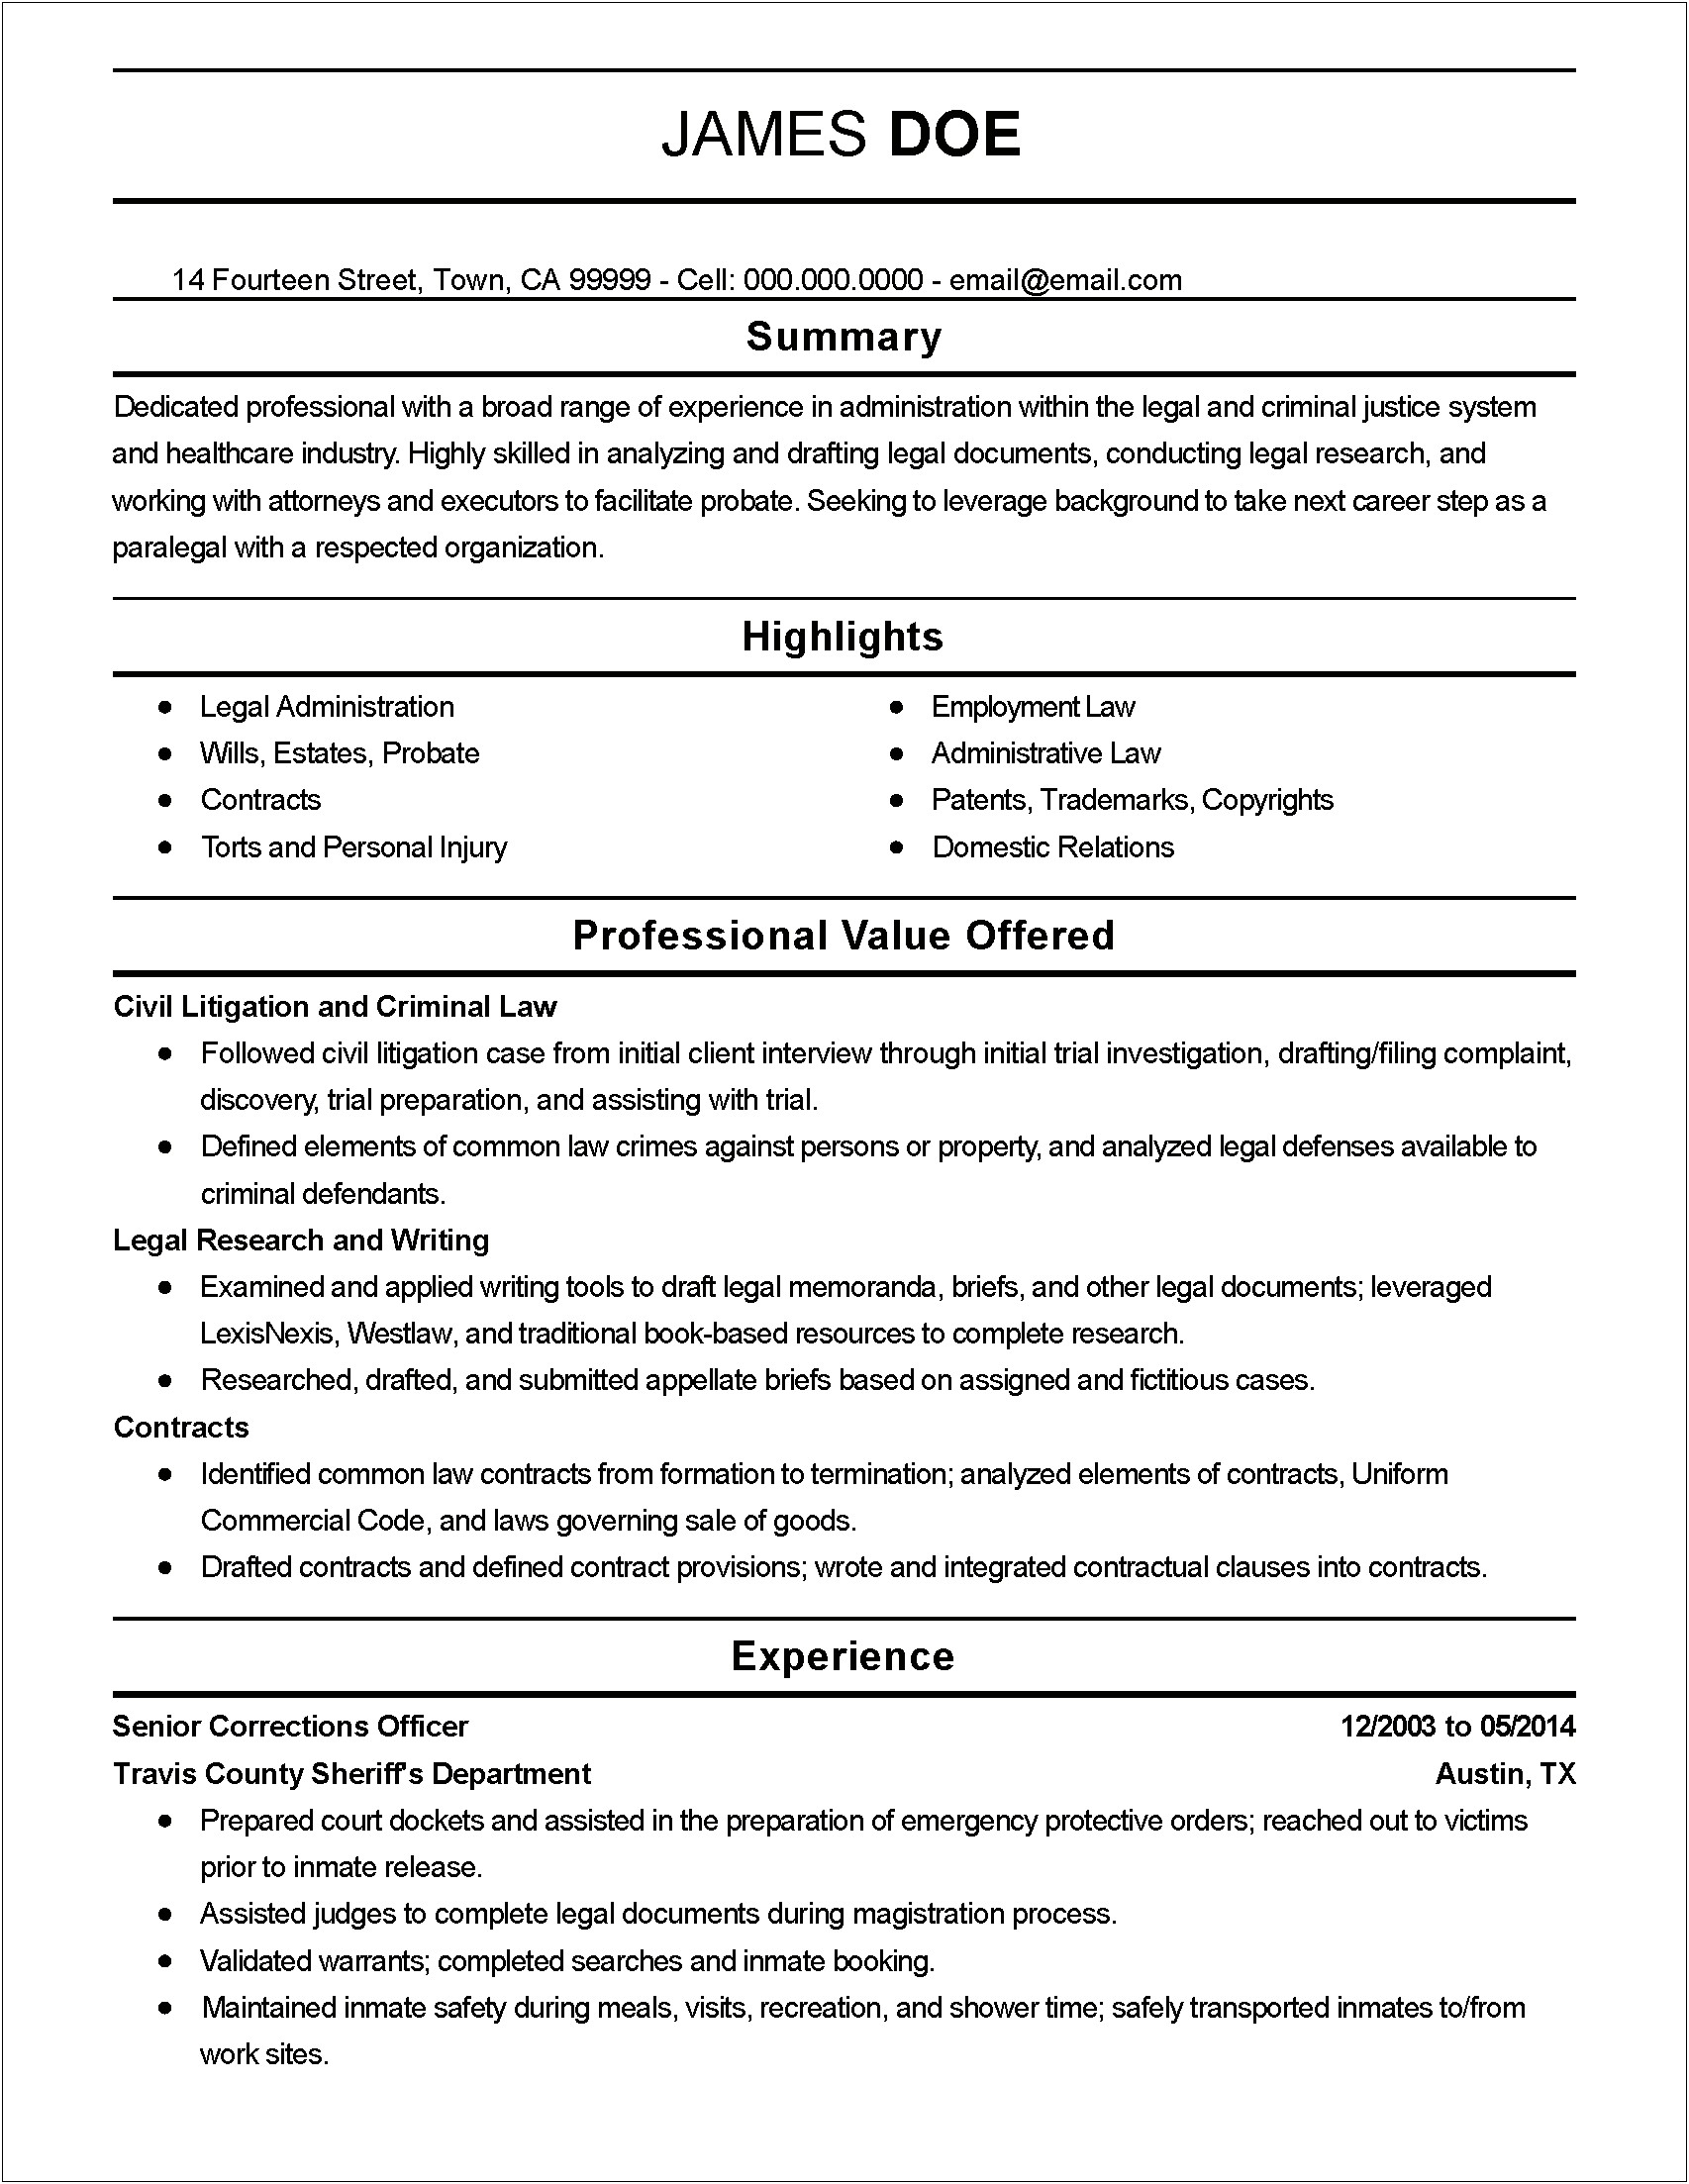 Chief Communications Officer Resume Sample